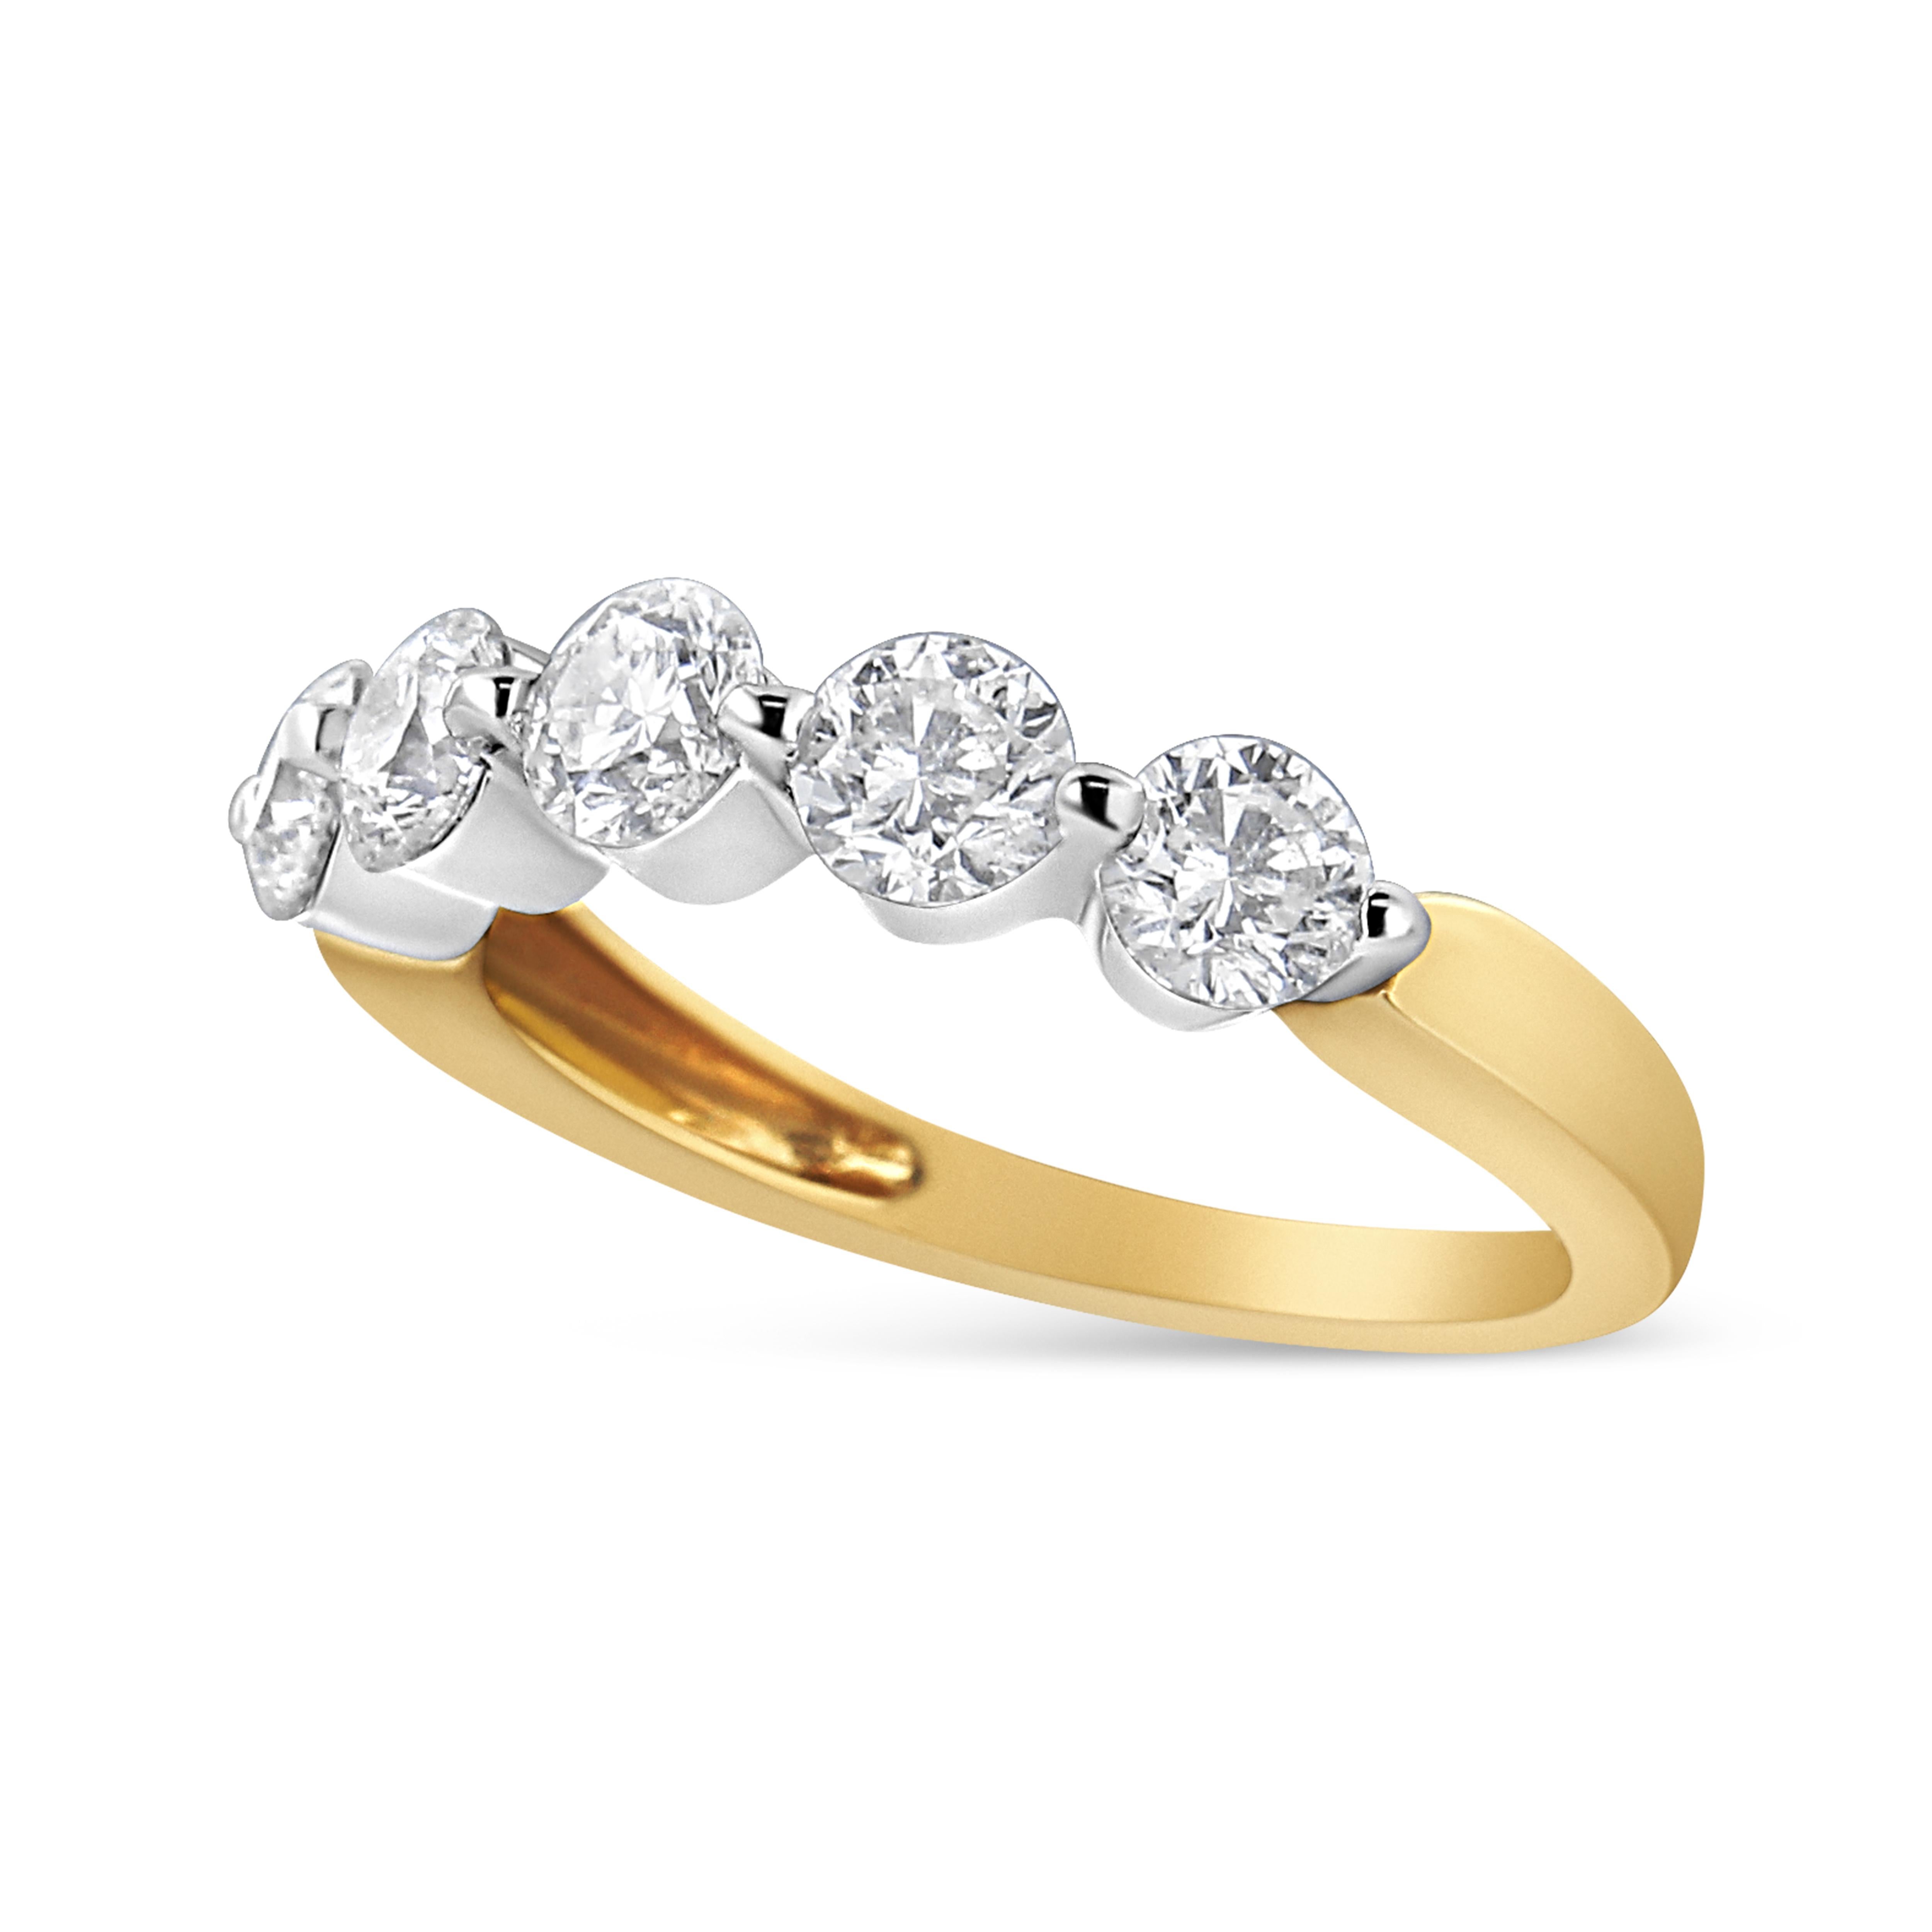 Sparkle bright with this magnificent 1 1/2 cttw diamond ring. Sporting a shining yellow gold band, this ring glows with 5 round-cut diamonds in a gleaming white gold. The gold is 14k and the diamonds are pave set. This white and yellow gold ring is